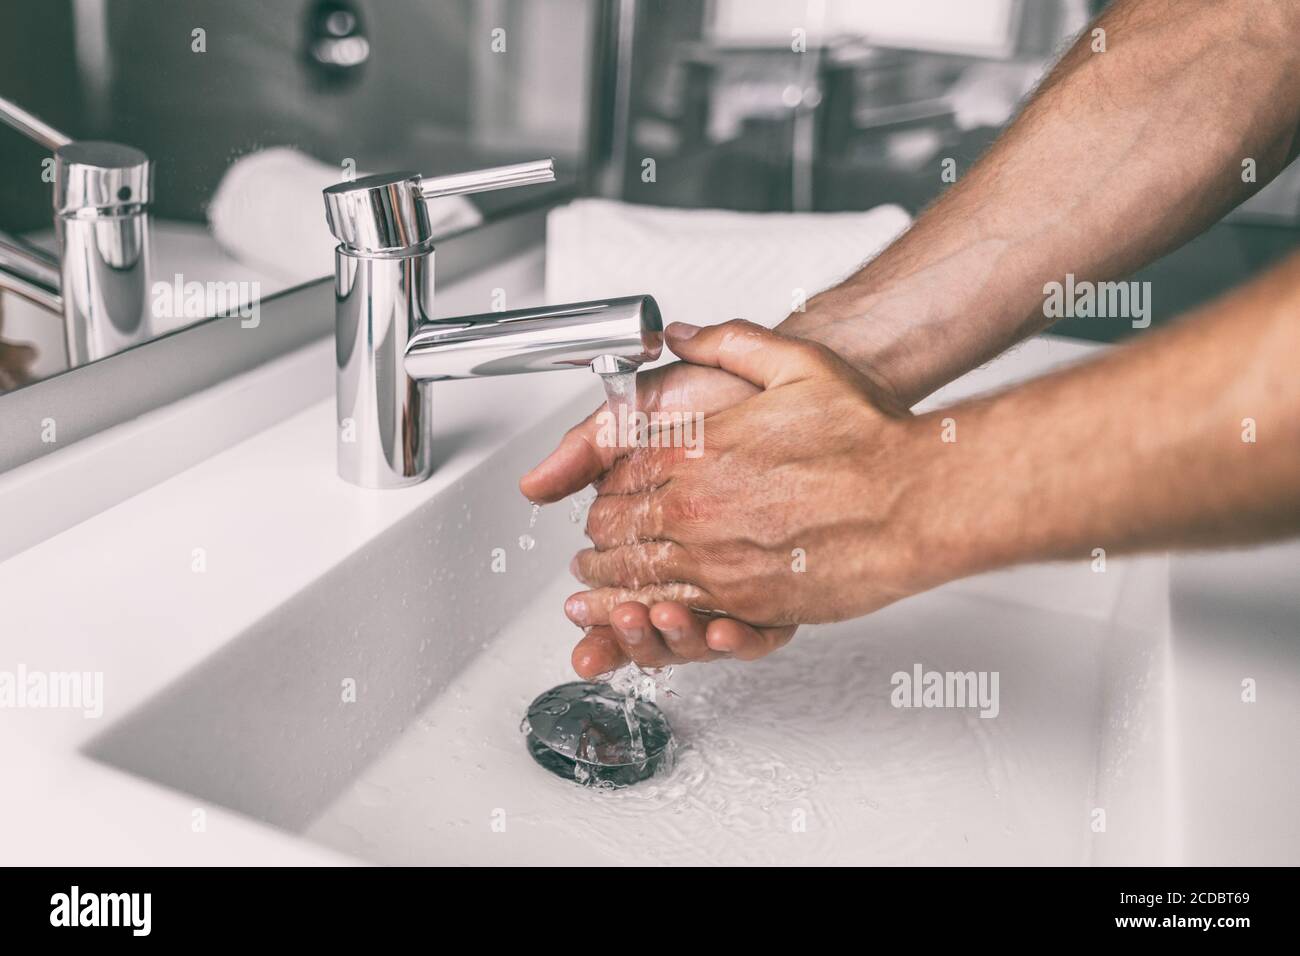 Washing hands rubbing with soap man for winter flu virus prevention, hygiene to stop spreading germs Stock Photo